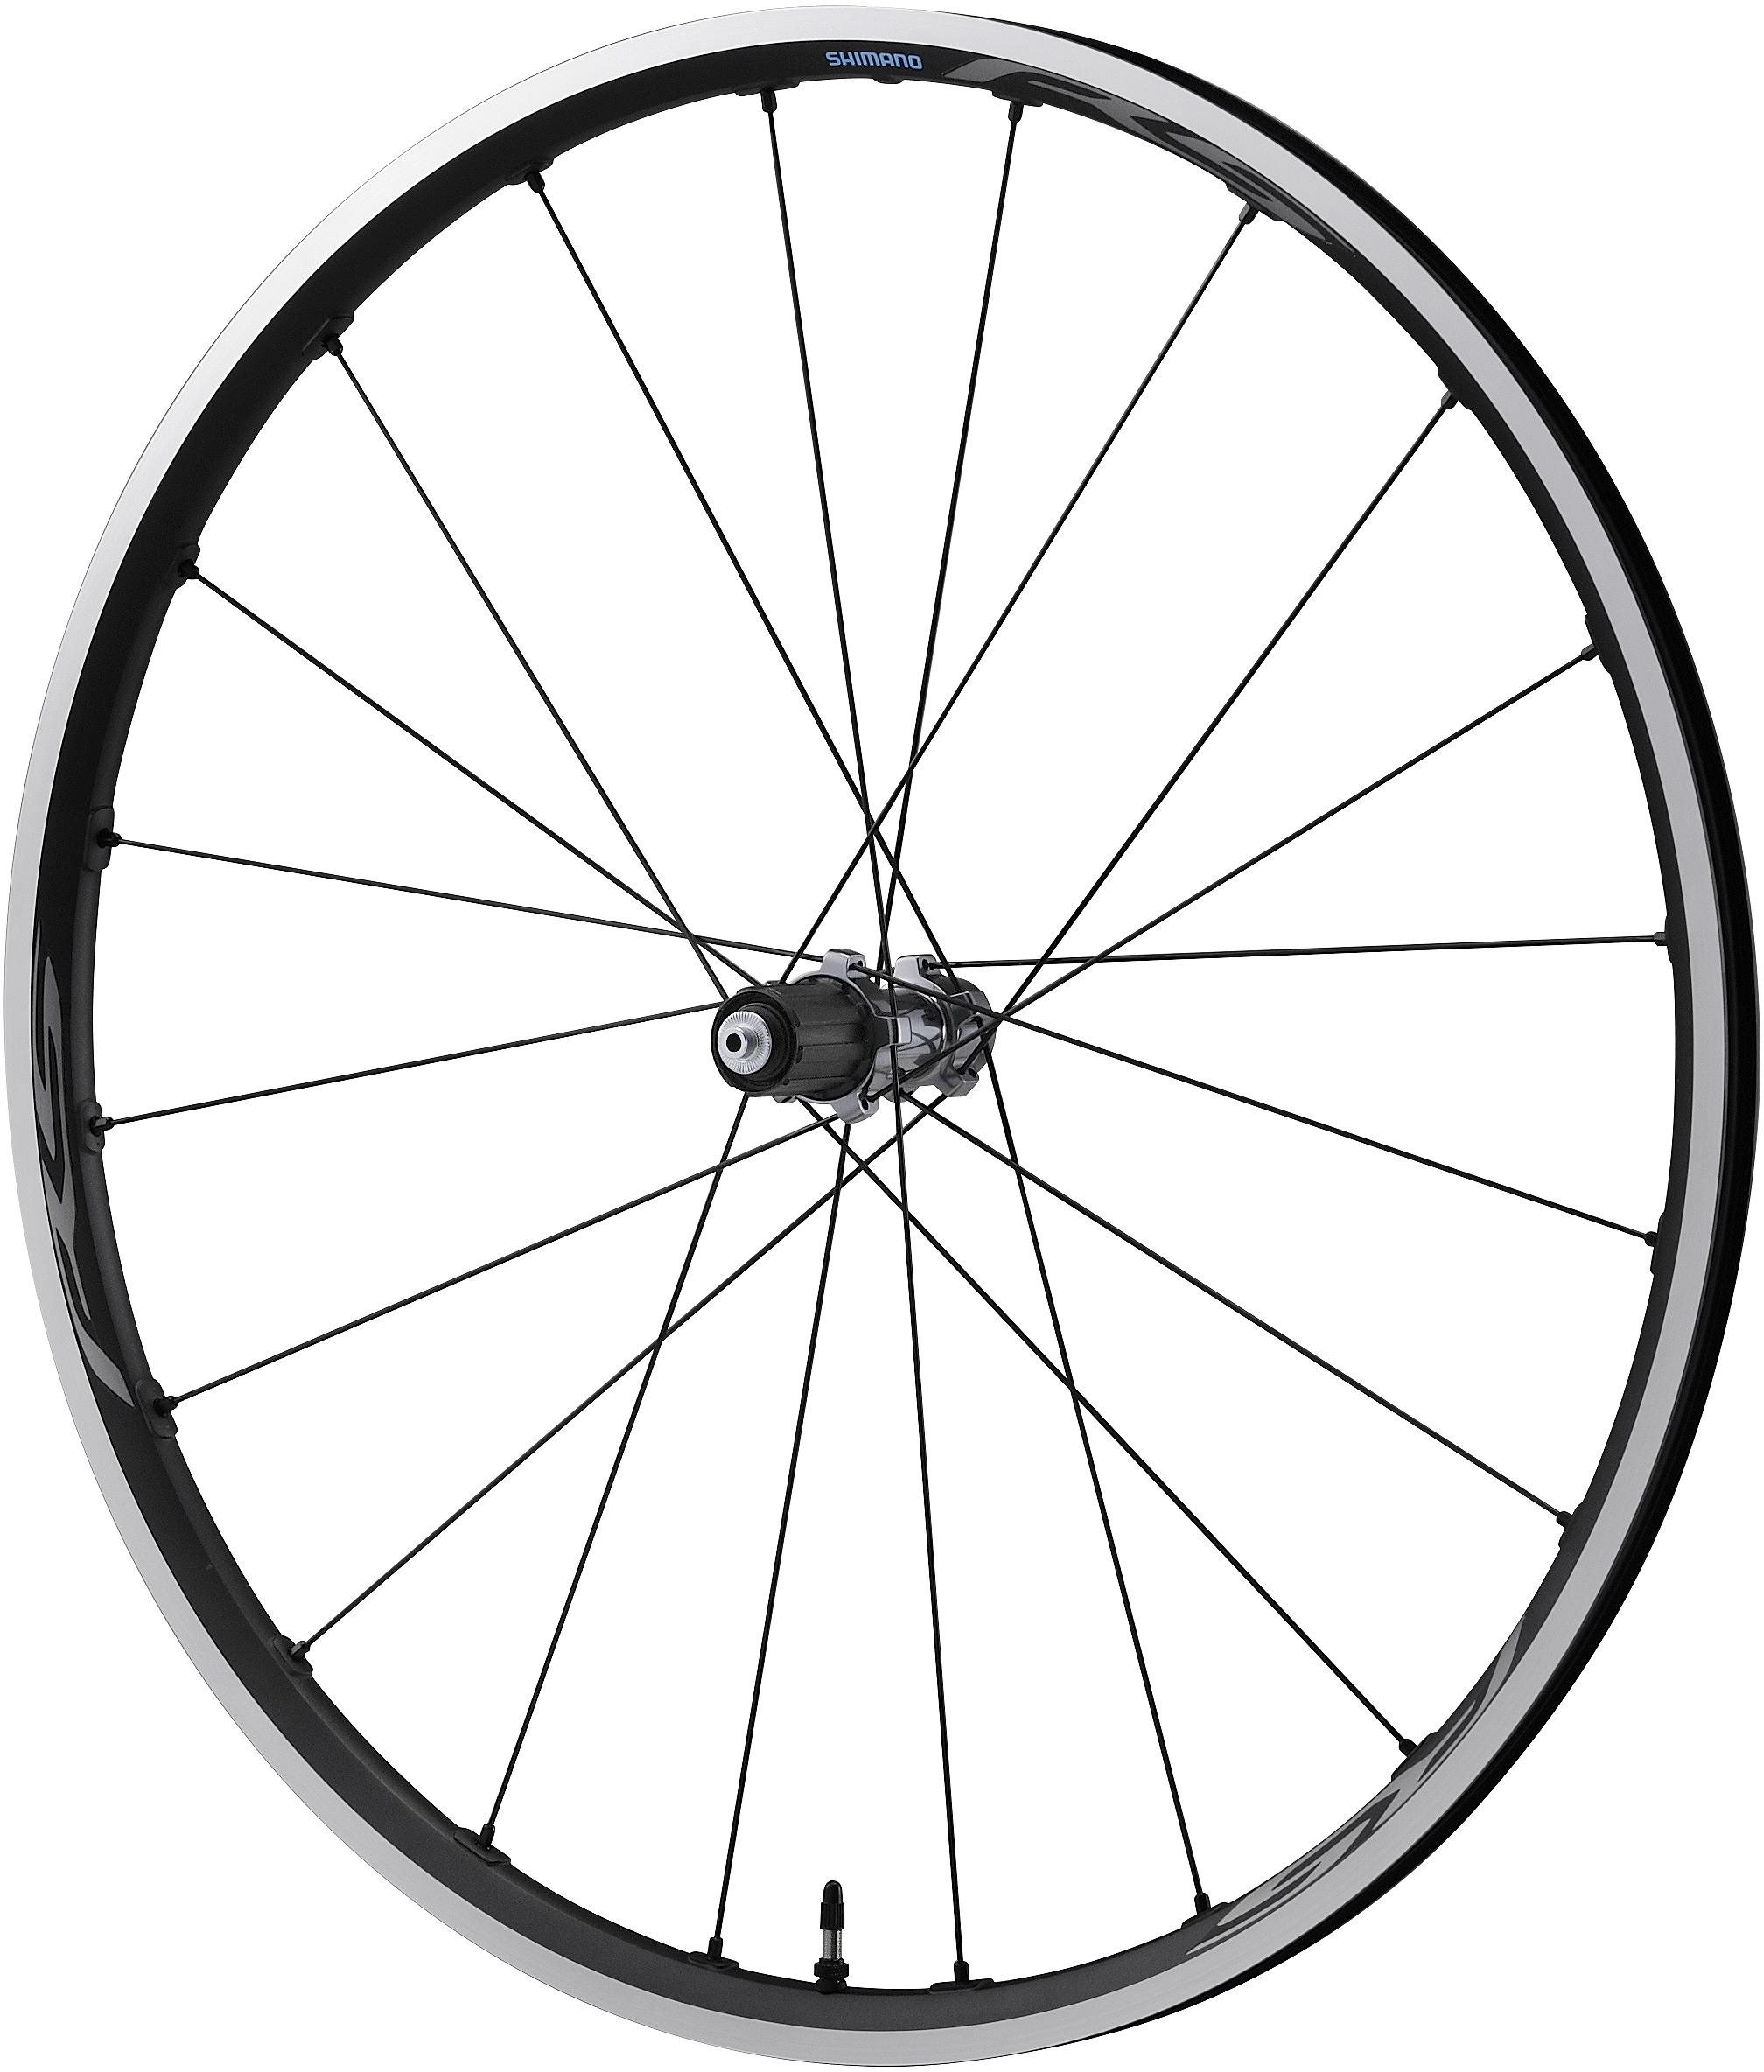 Rs500-Tl Tubeless Compatible Clincher, Q/R, Grey, Pair